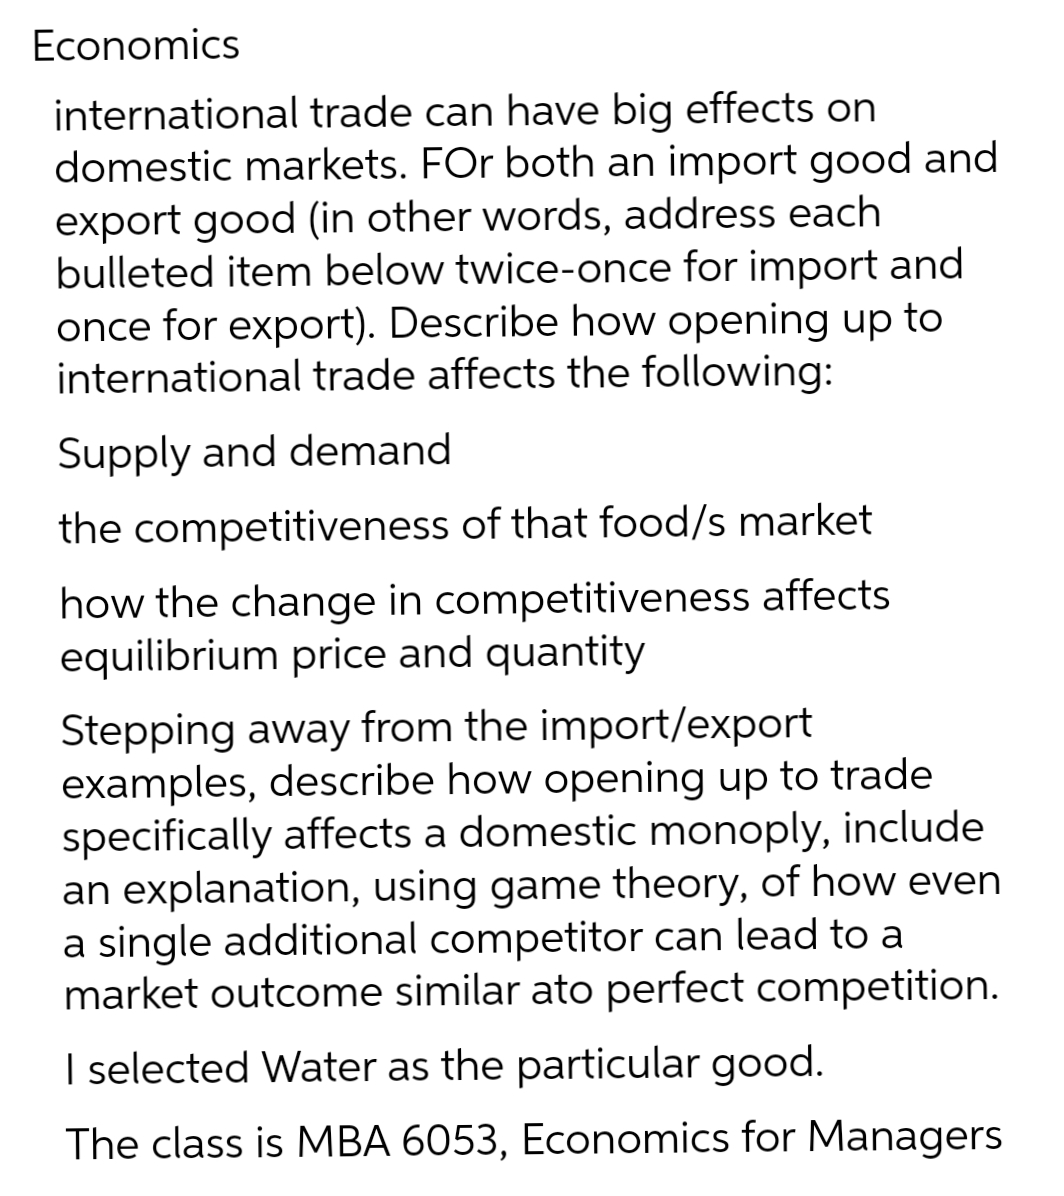 Economics
international trade can have big effects on
domestic markets. For both an import good and
export good (in other words, address each
bulleted item below twice-once for import and
once for export). Describe how opening up to
international trade affects the following:
Supply and demand
the competitiveness of that food/s market
how the change in competitiveness affects
equilibrium price and quantity
Stepping away from the import/export
examples, describe how opening up to trade
specifically affects a domestic monoply, include
an explanation, using game theory, of how even
a single additional competitor can lead to a
market outcome similar ato perfect competition.
I selected Water as the particular good.
The class is MBA 6053, Economics for Managers